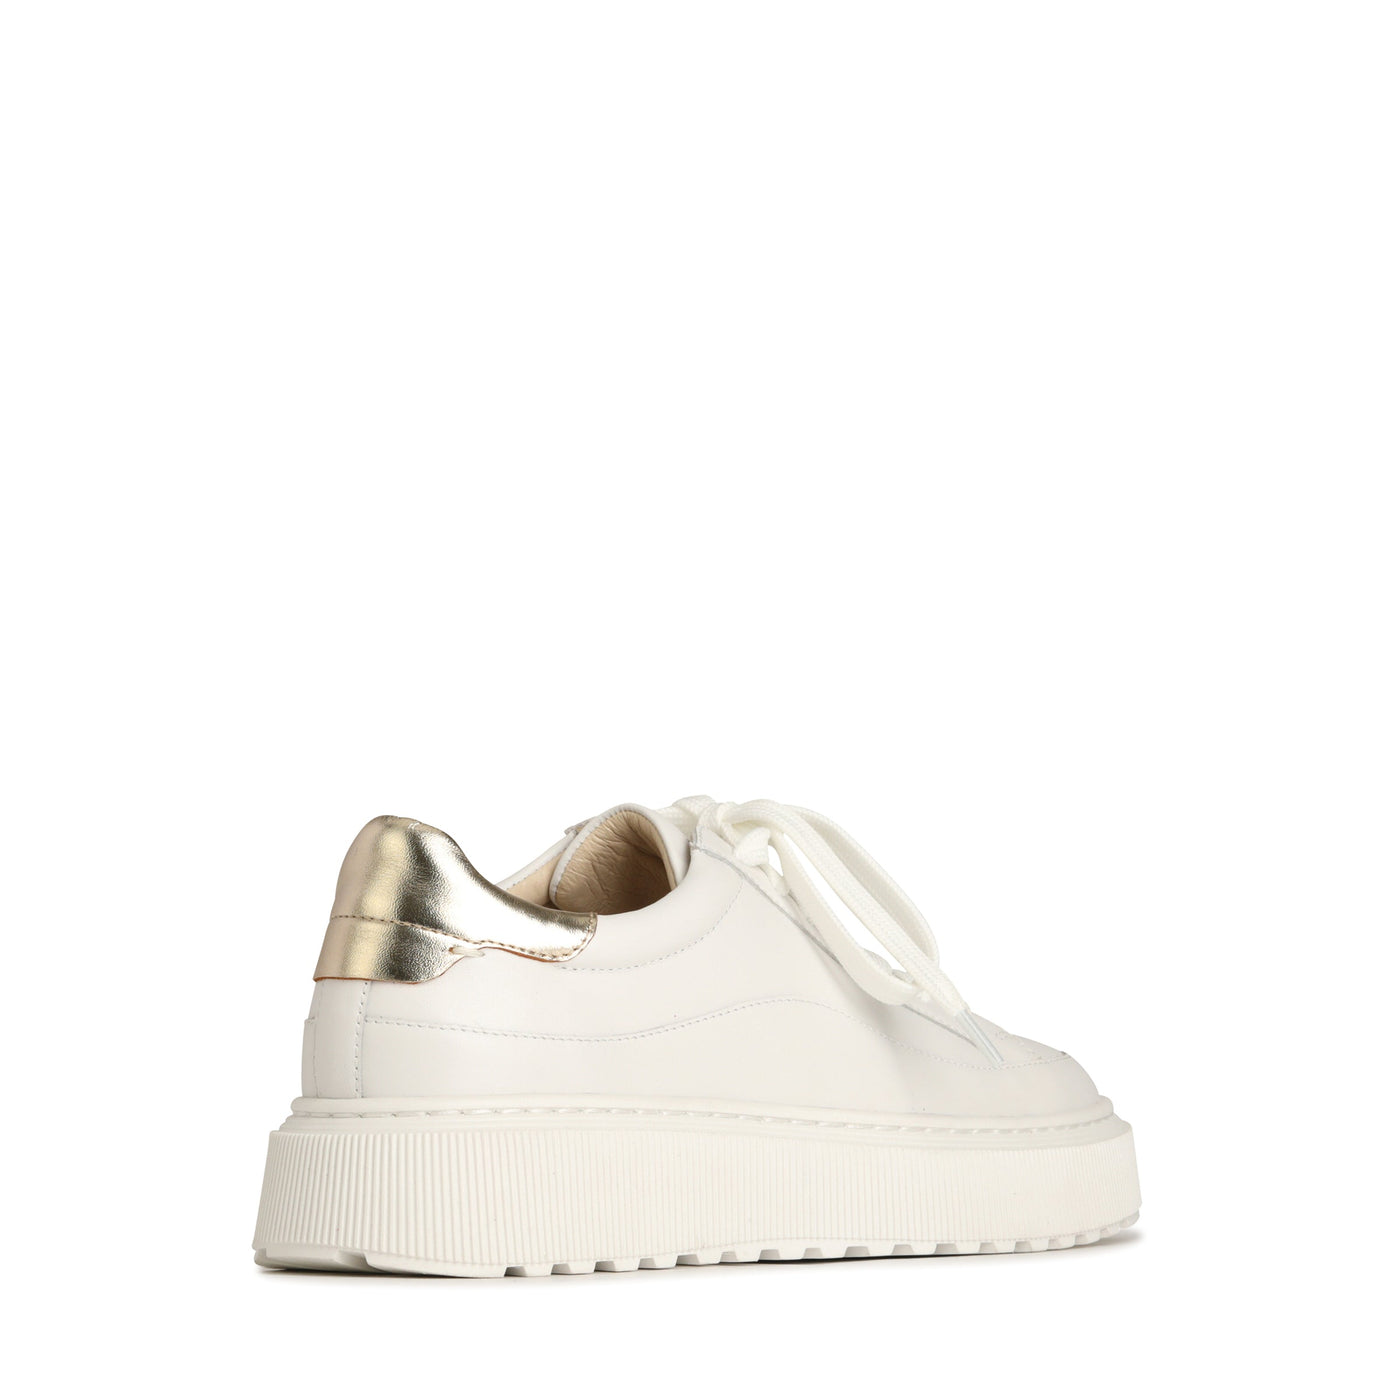 EOS LAELA WHITE CHAMPAGNE - Women sneakers - Collective Shoes 